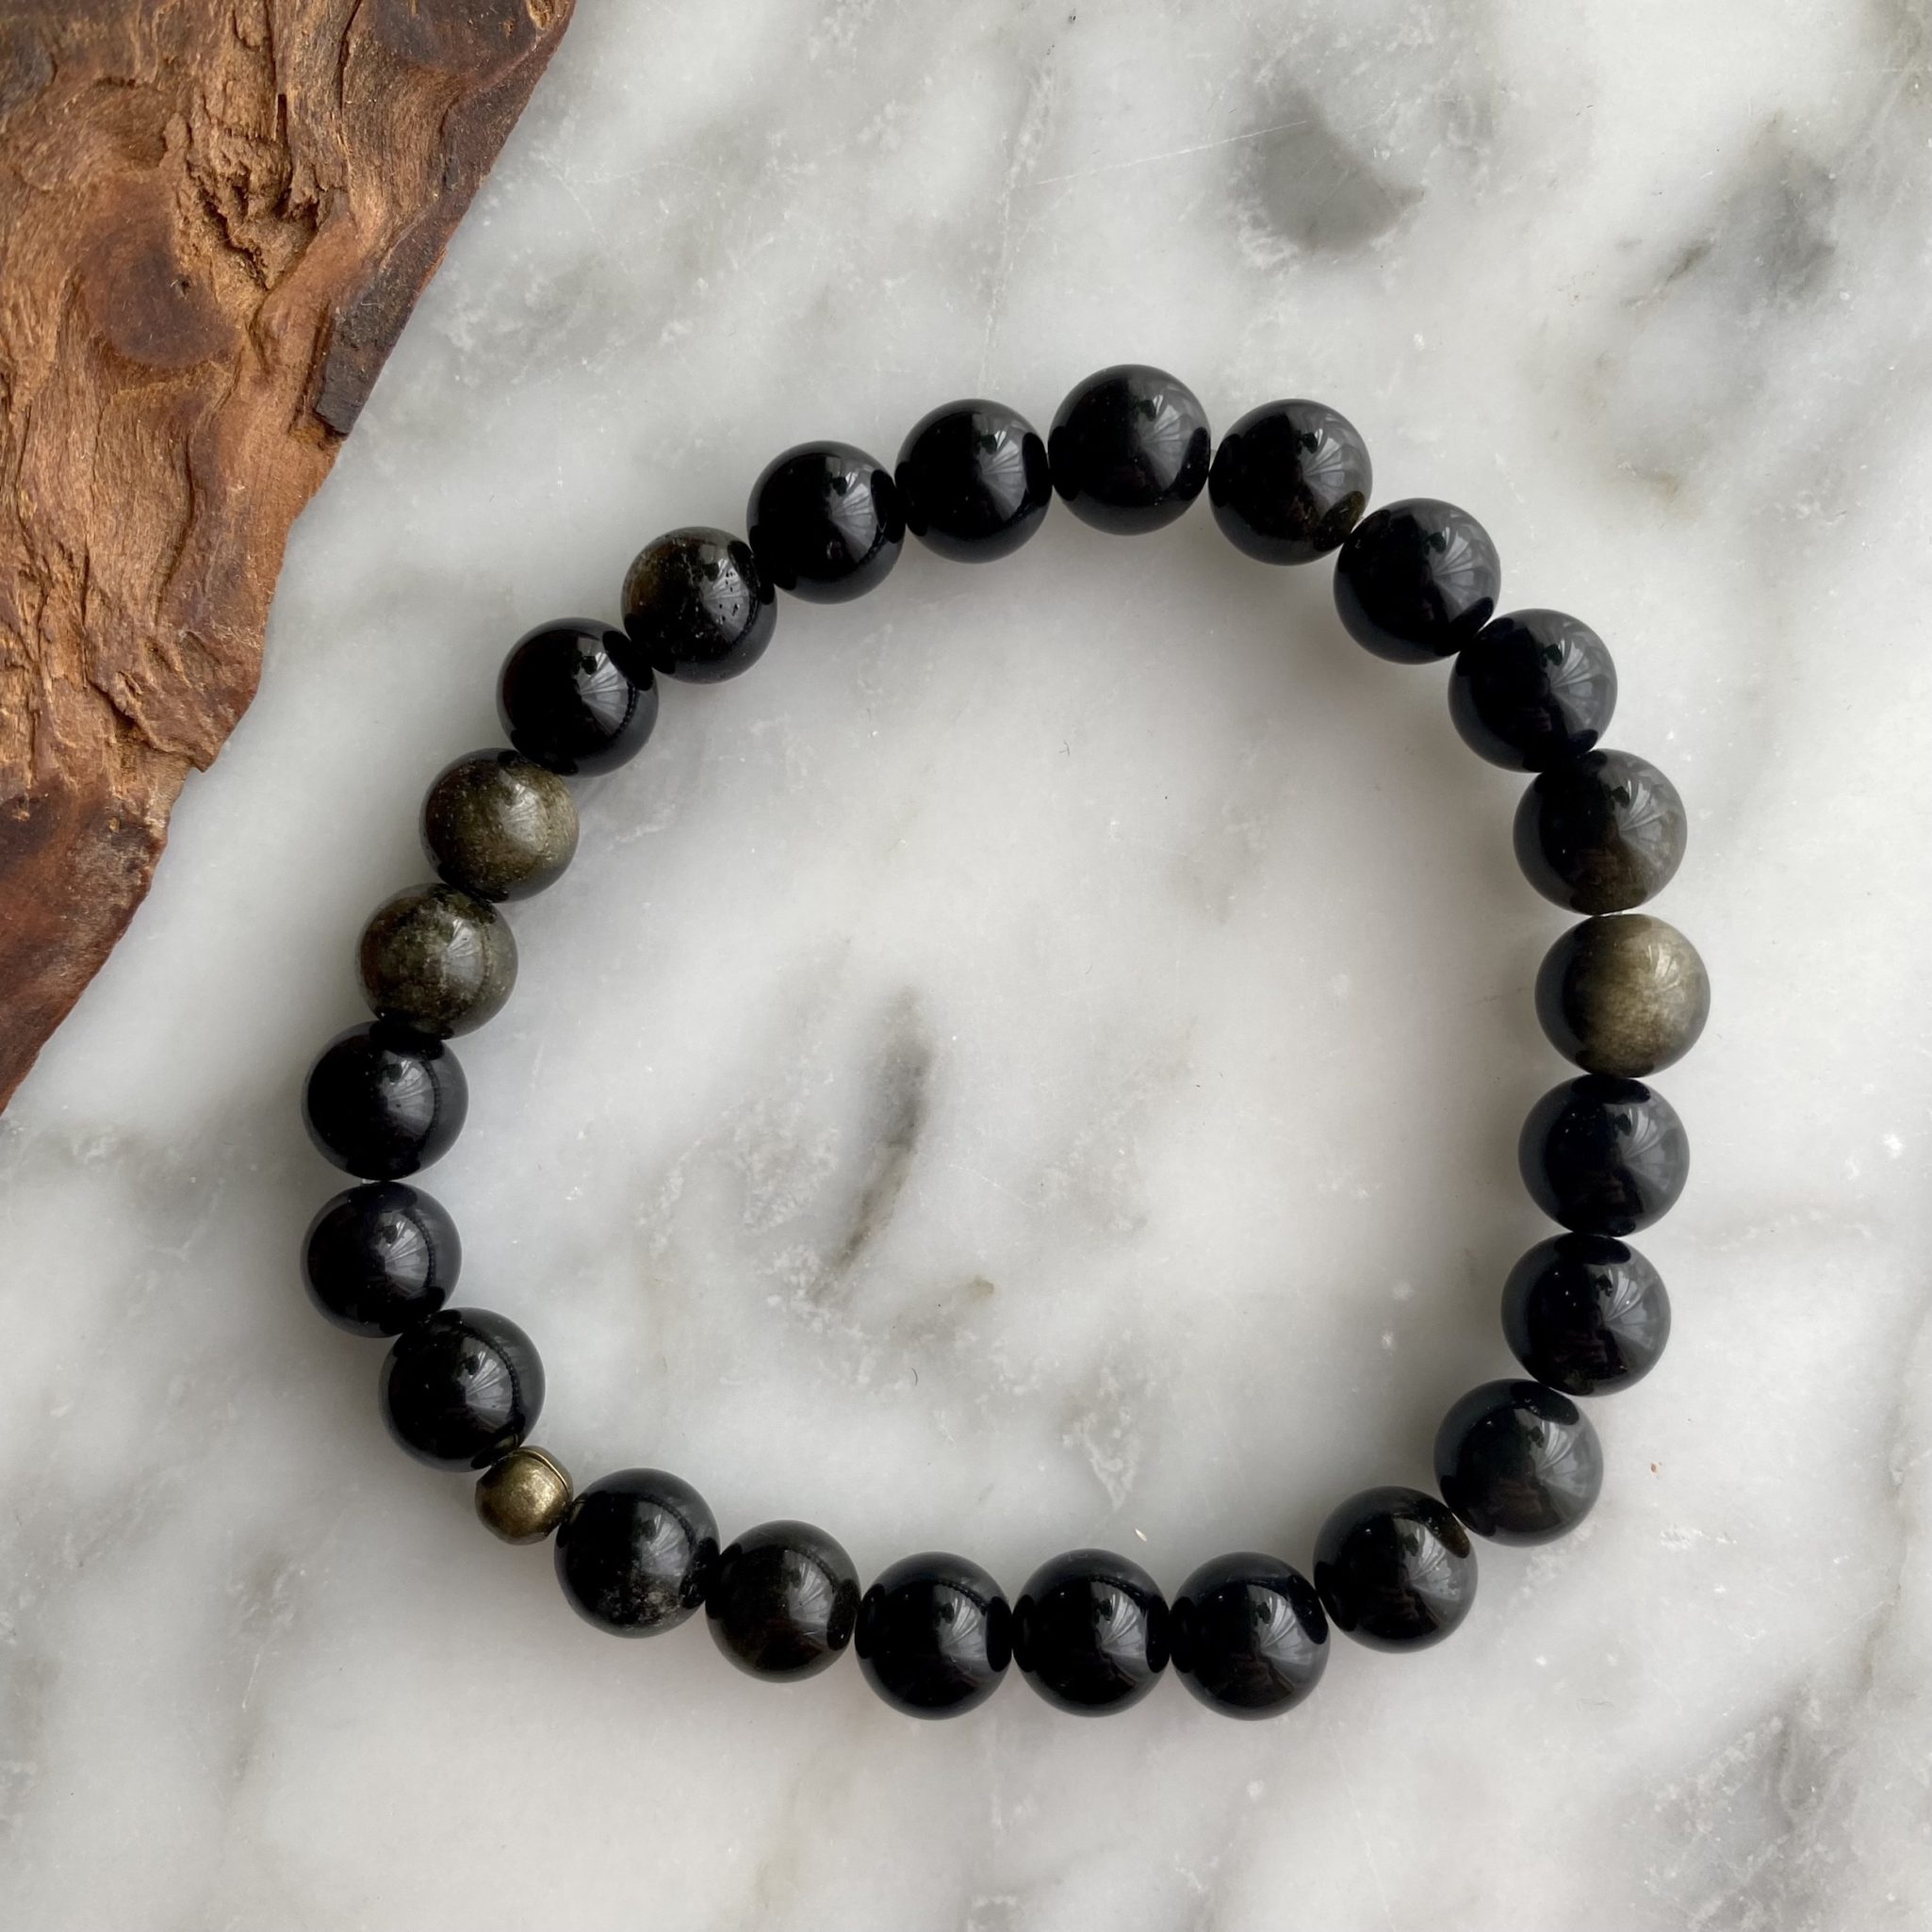 Obsidian Gemstone Bracelet for PCOD/PCOS Treatment & Protection -  Handcrafted